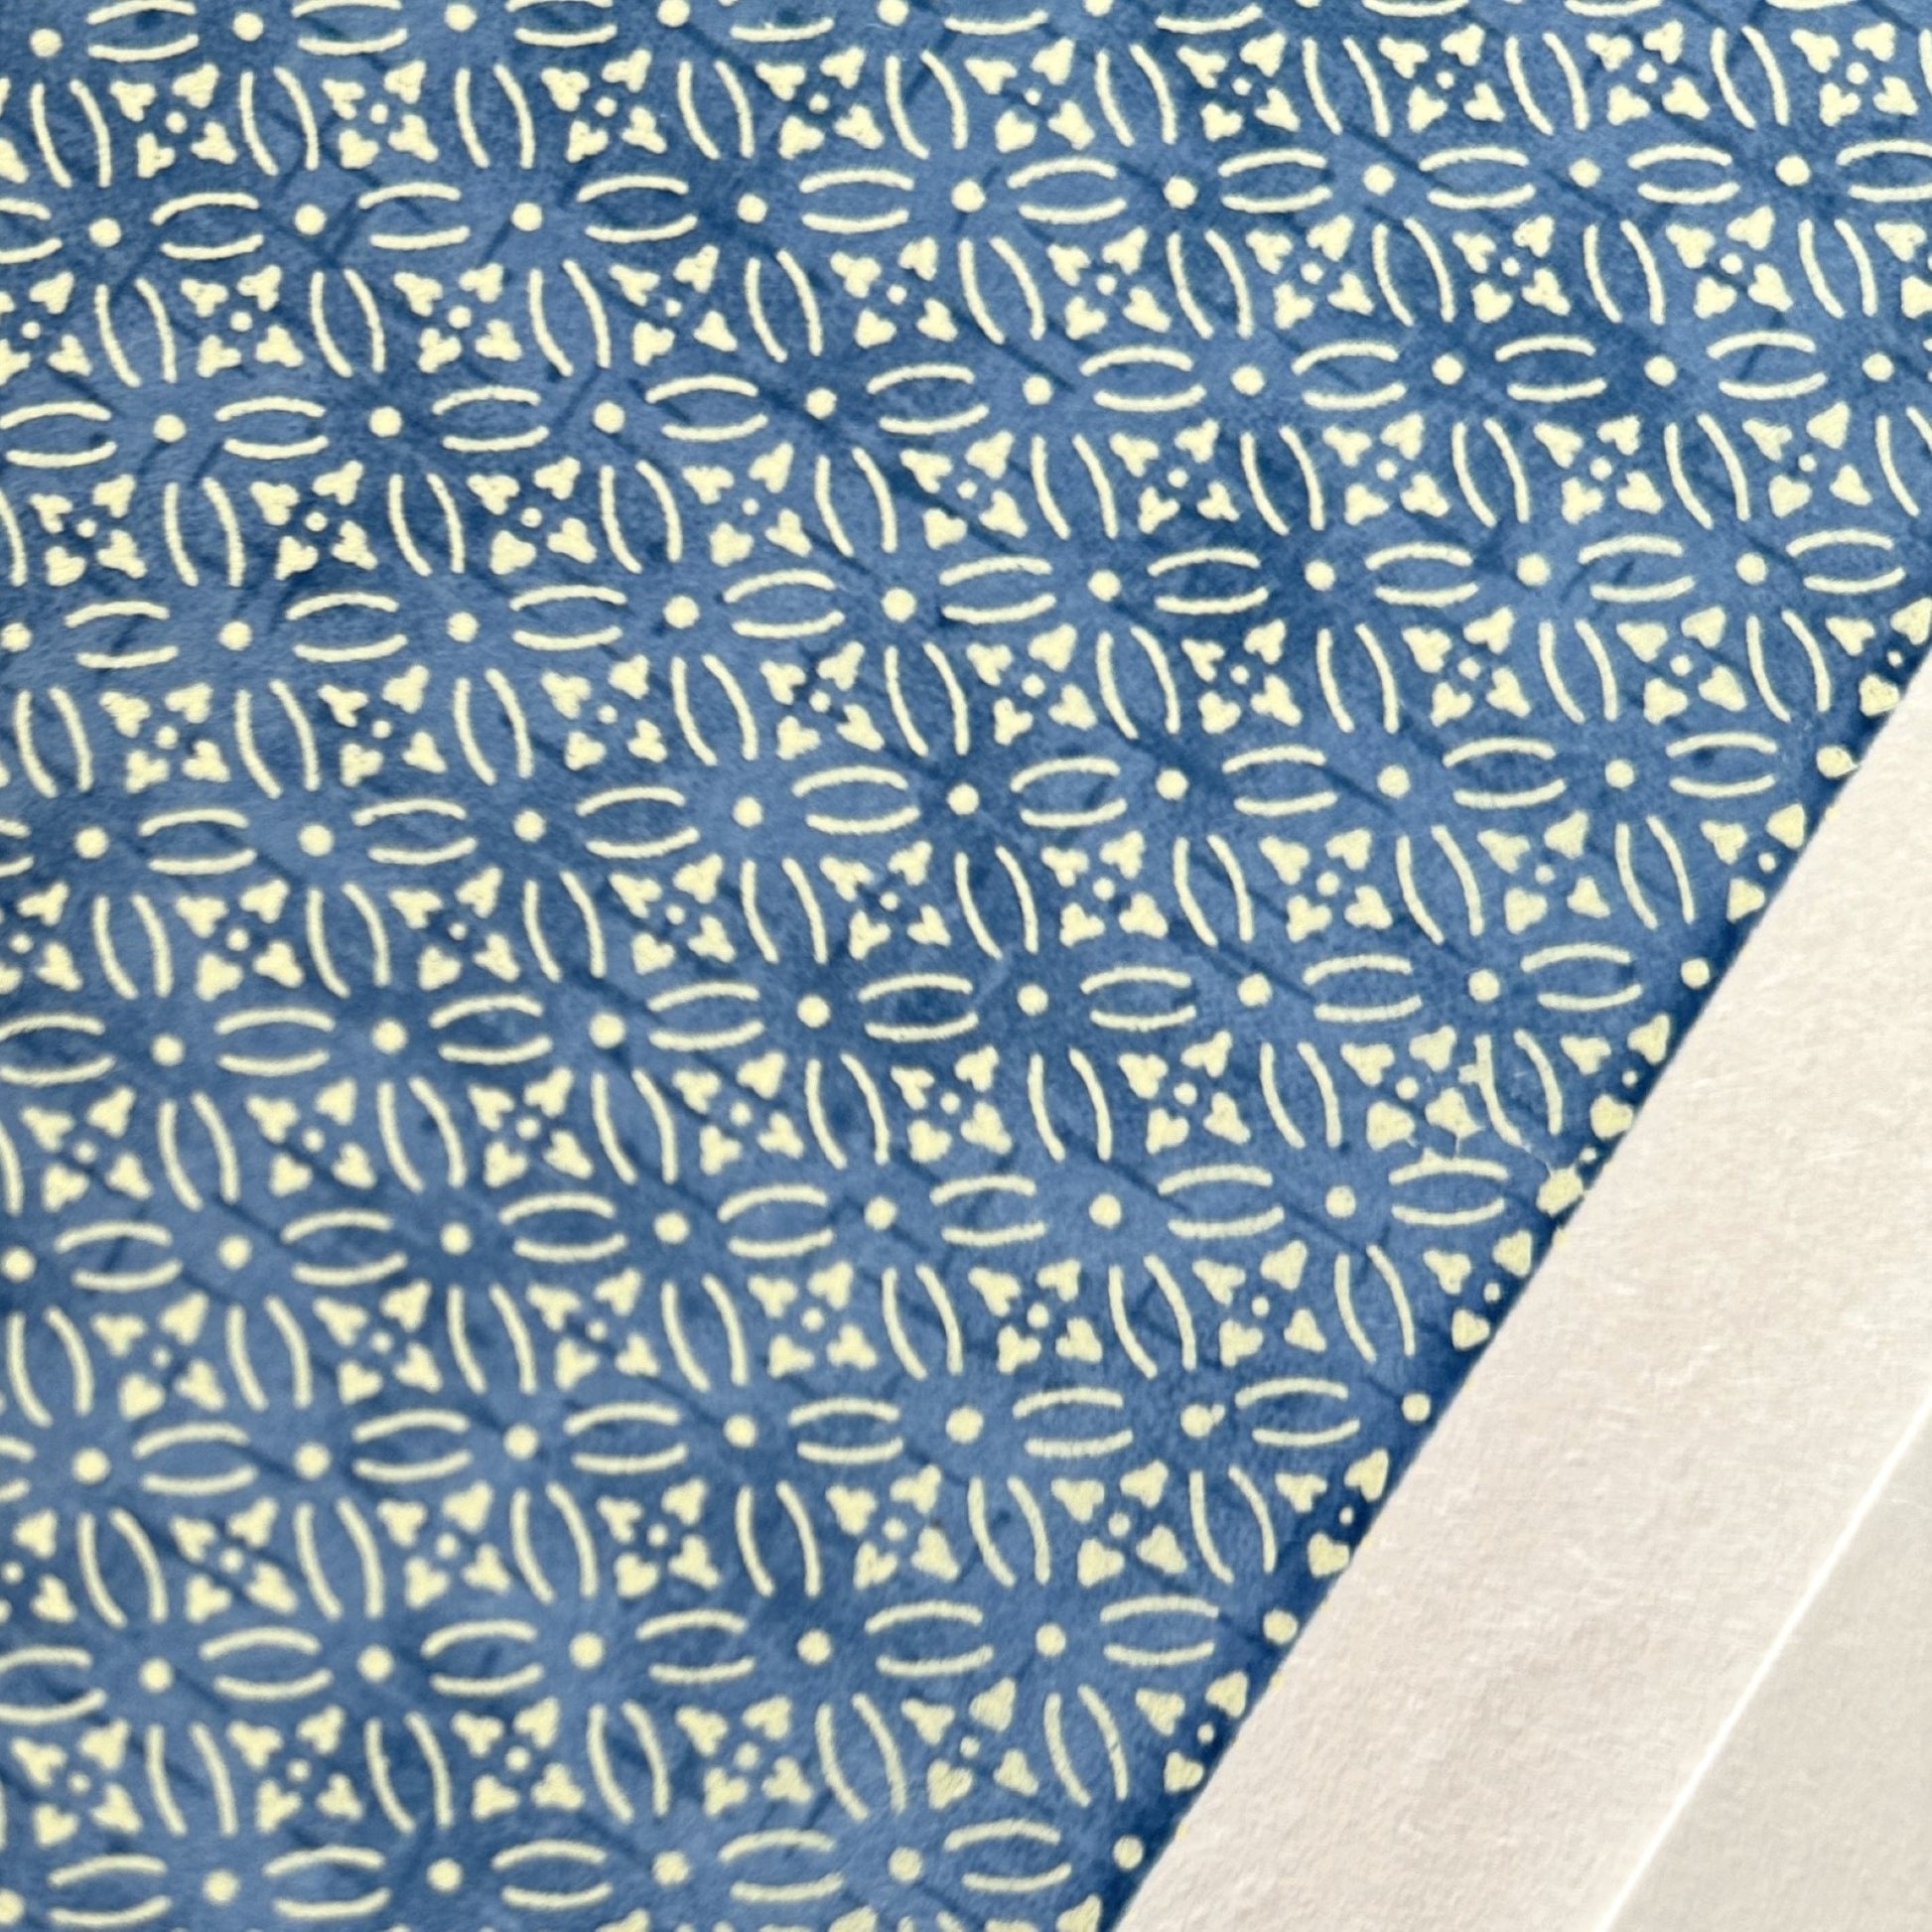 Japanese silkscreen chiyogami paper with a two-tone sky blue geometric pattern on creamy white